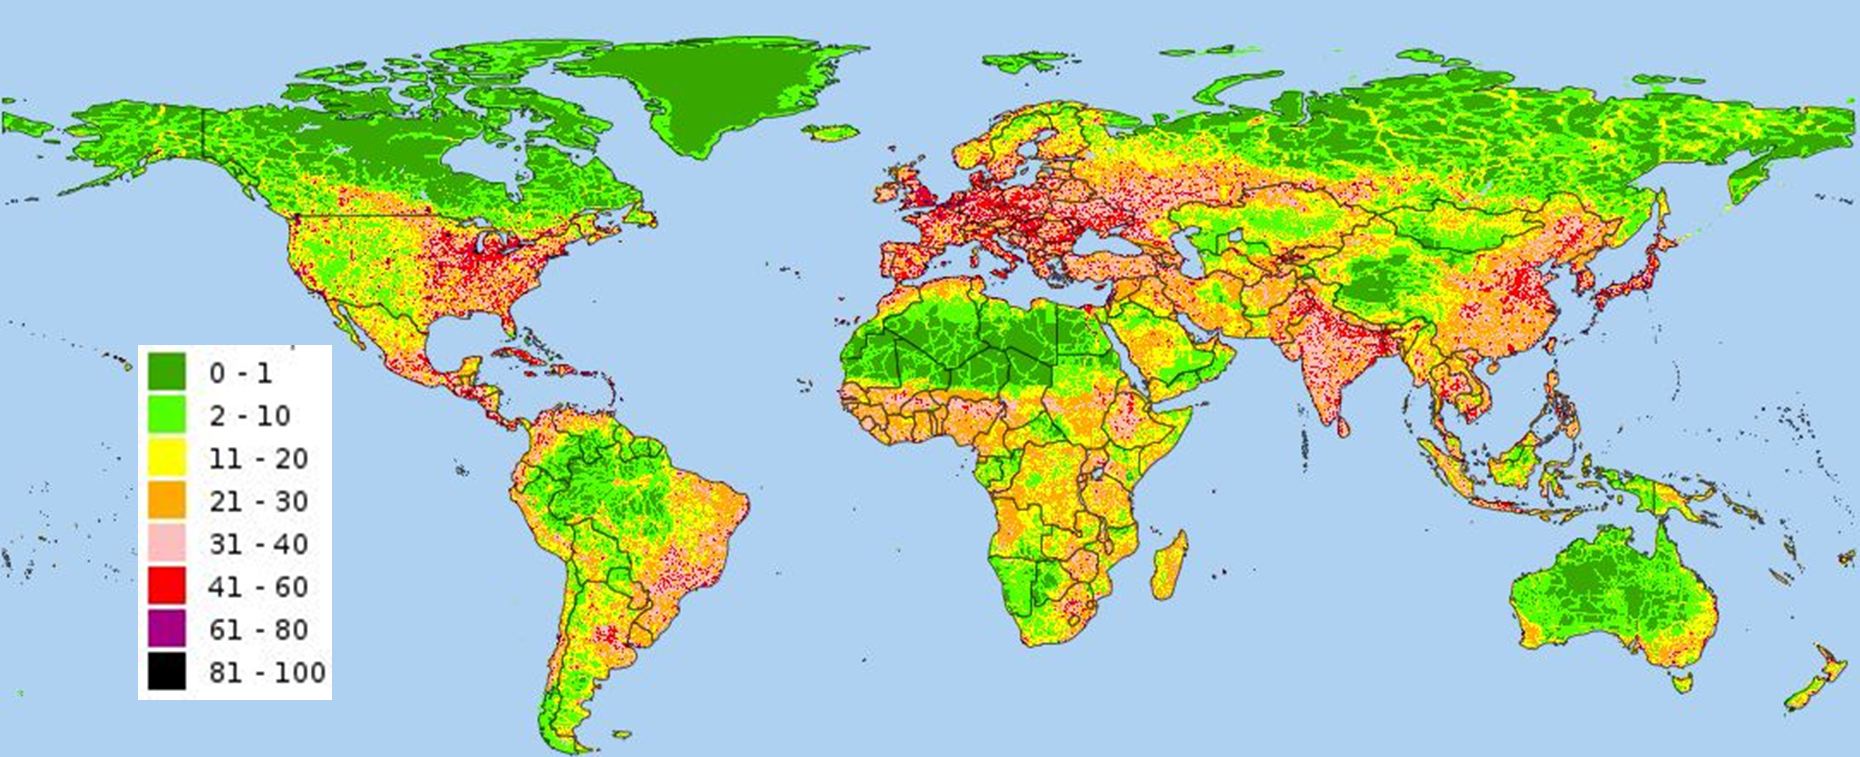 global map of the human ecological impact